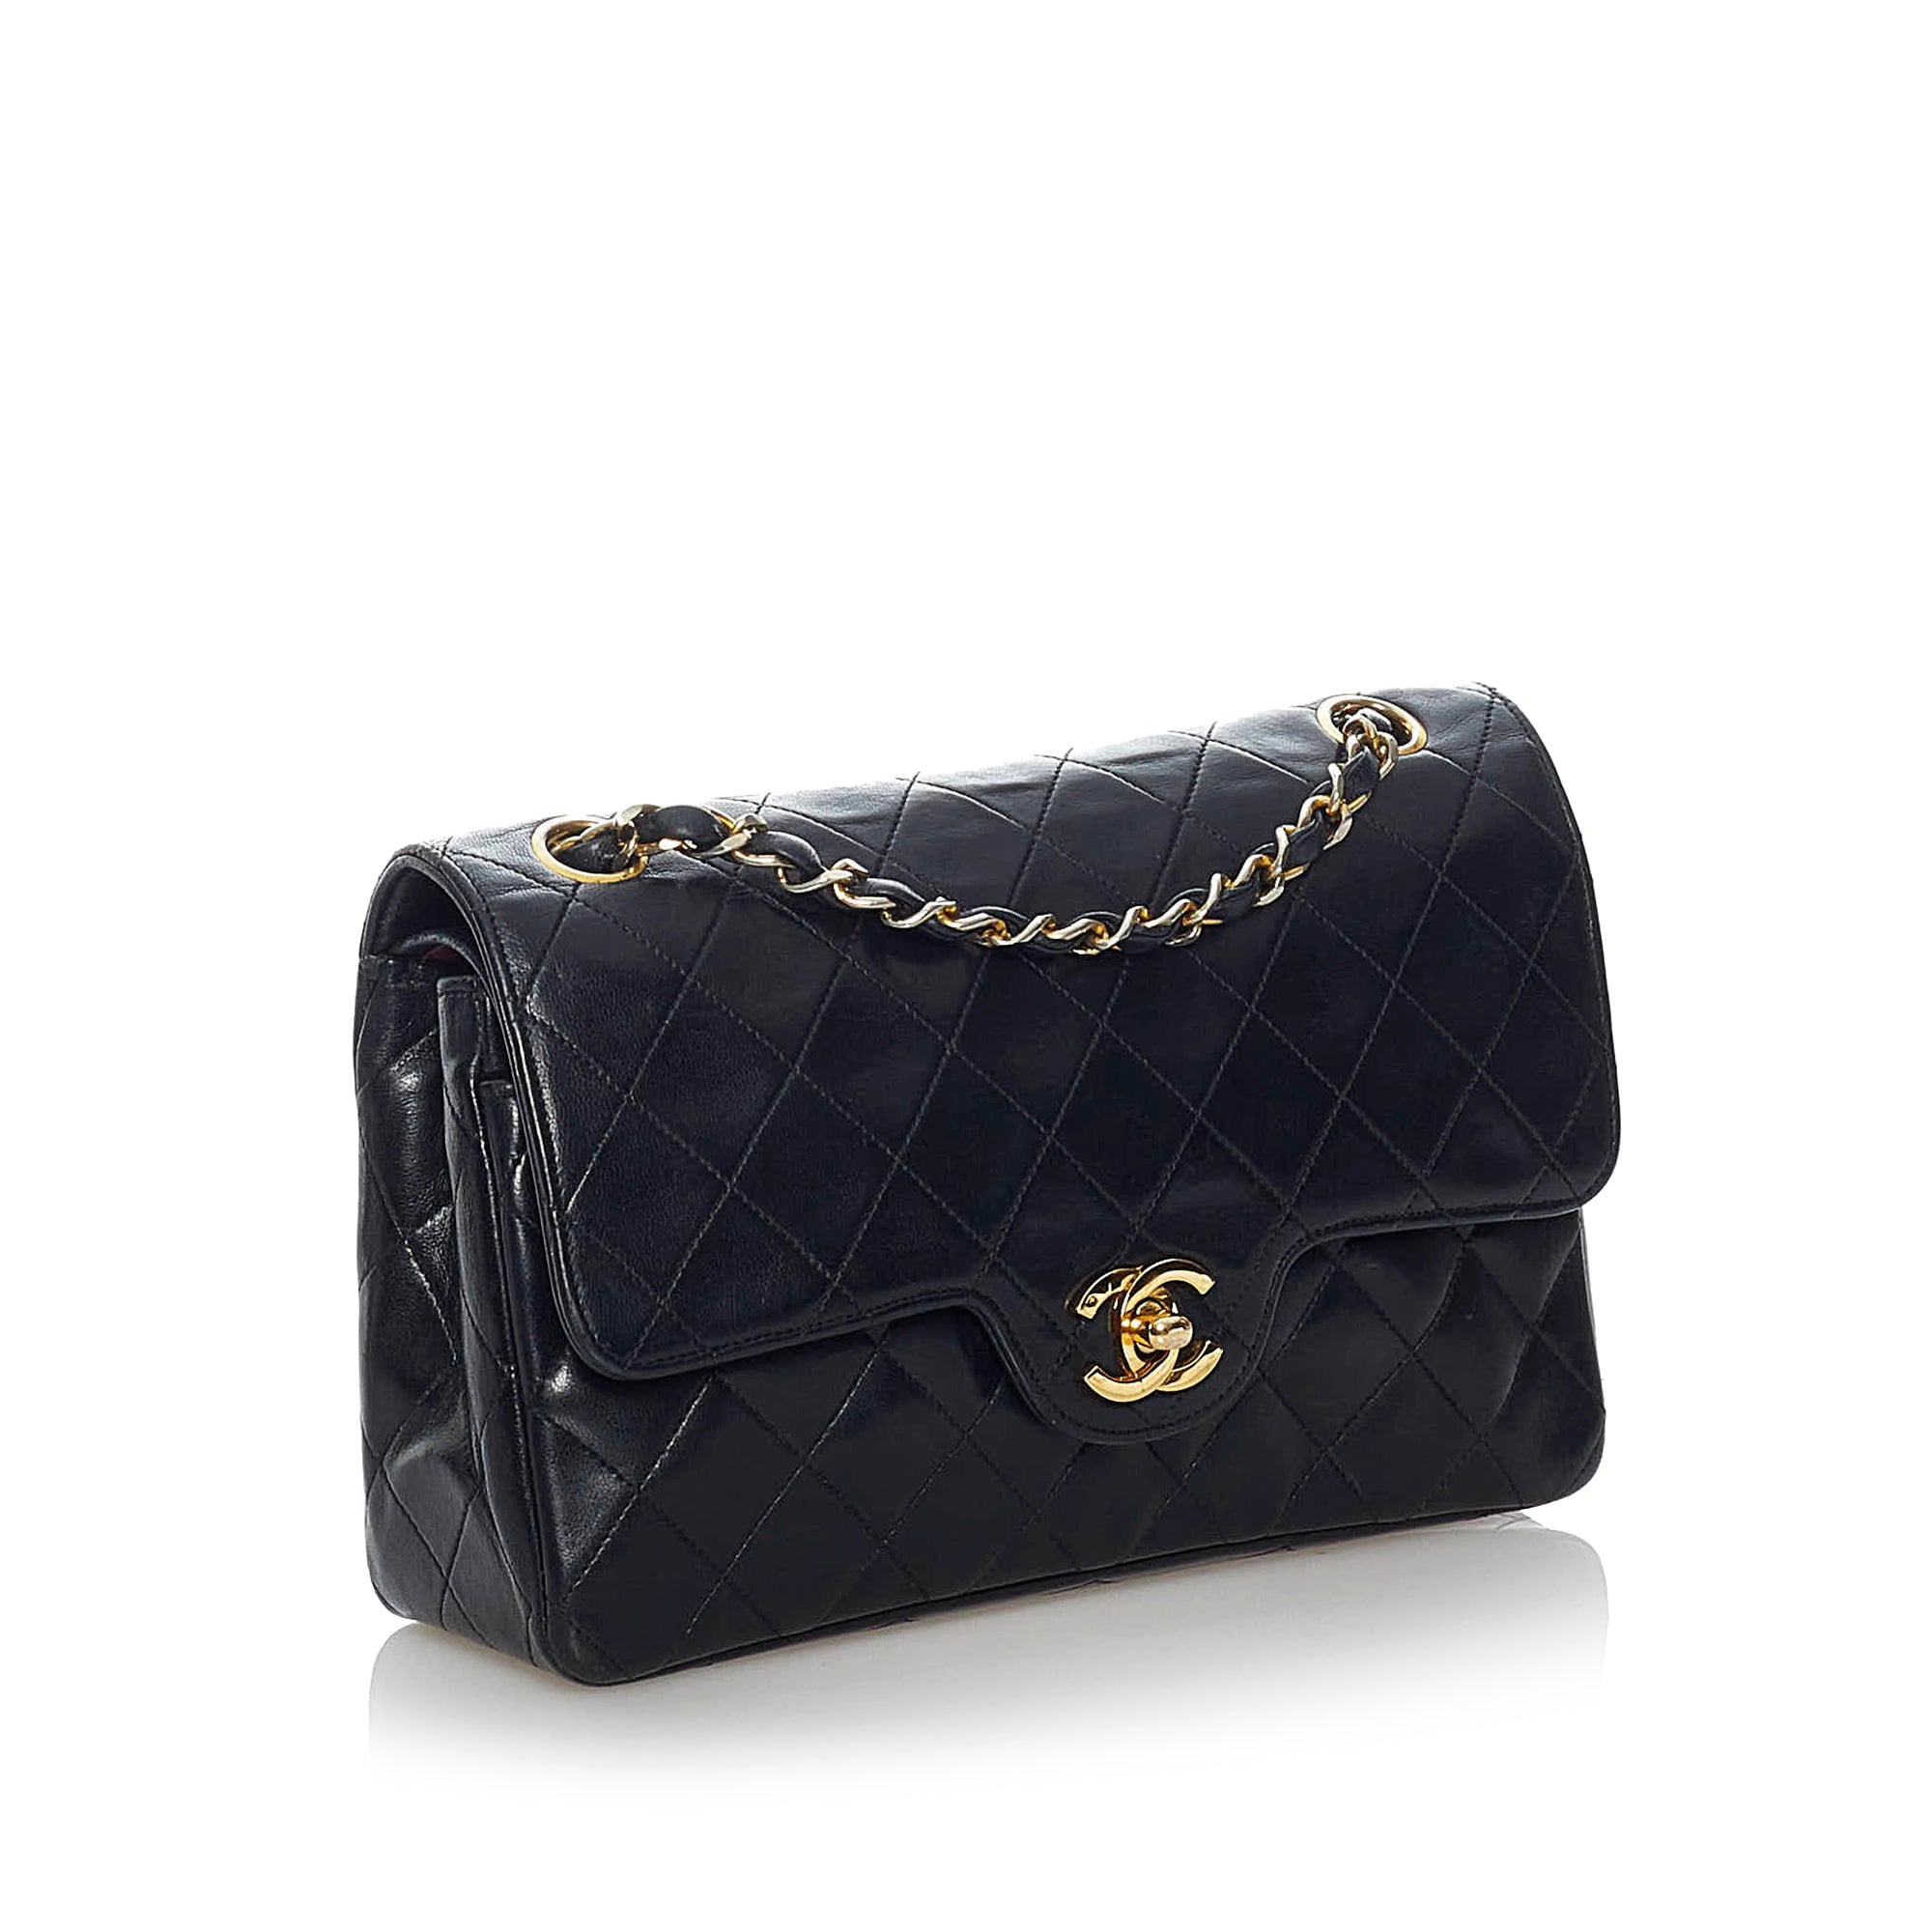 At Auction: CHANEL - Black CC Caviar Quilted Leather Jumbo Shoulder Bag